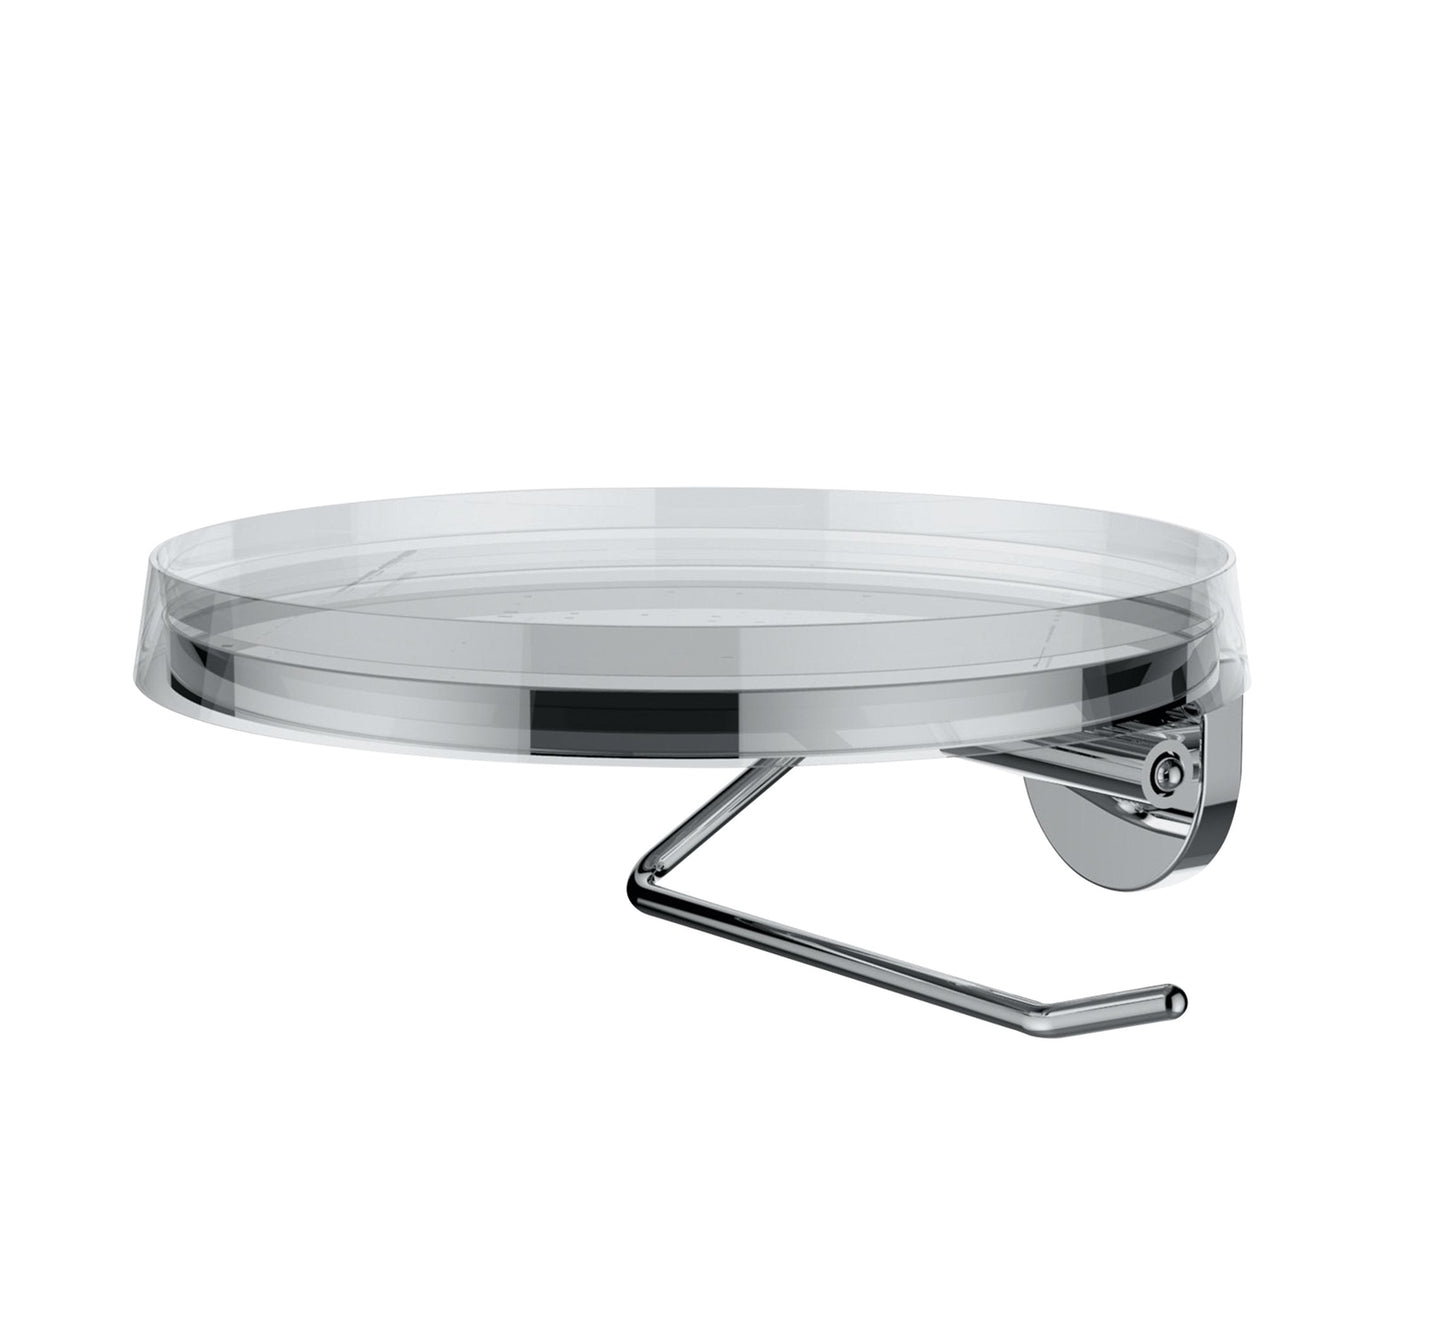 LAUFEN KARTELL TOILET PAPER HOLDER ROUND,  183 MM, TRANSPARENT CRYSTAL PLASTIC DISC INCLUDED BRASS CHROME PLATED - 3.8433.2.004.000.1 - Tadmur Trading